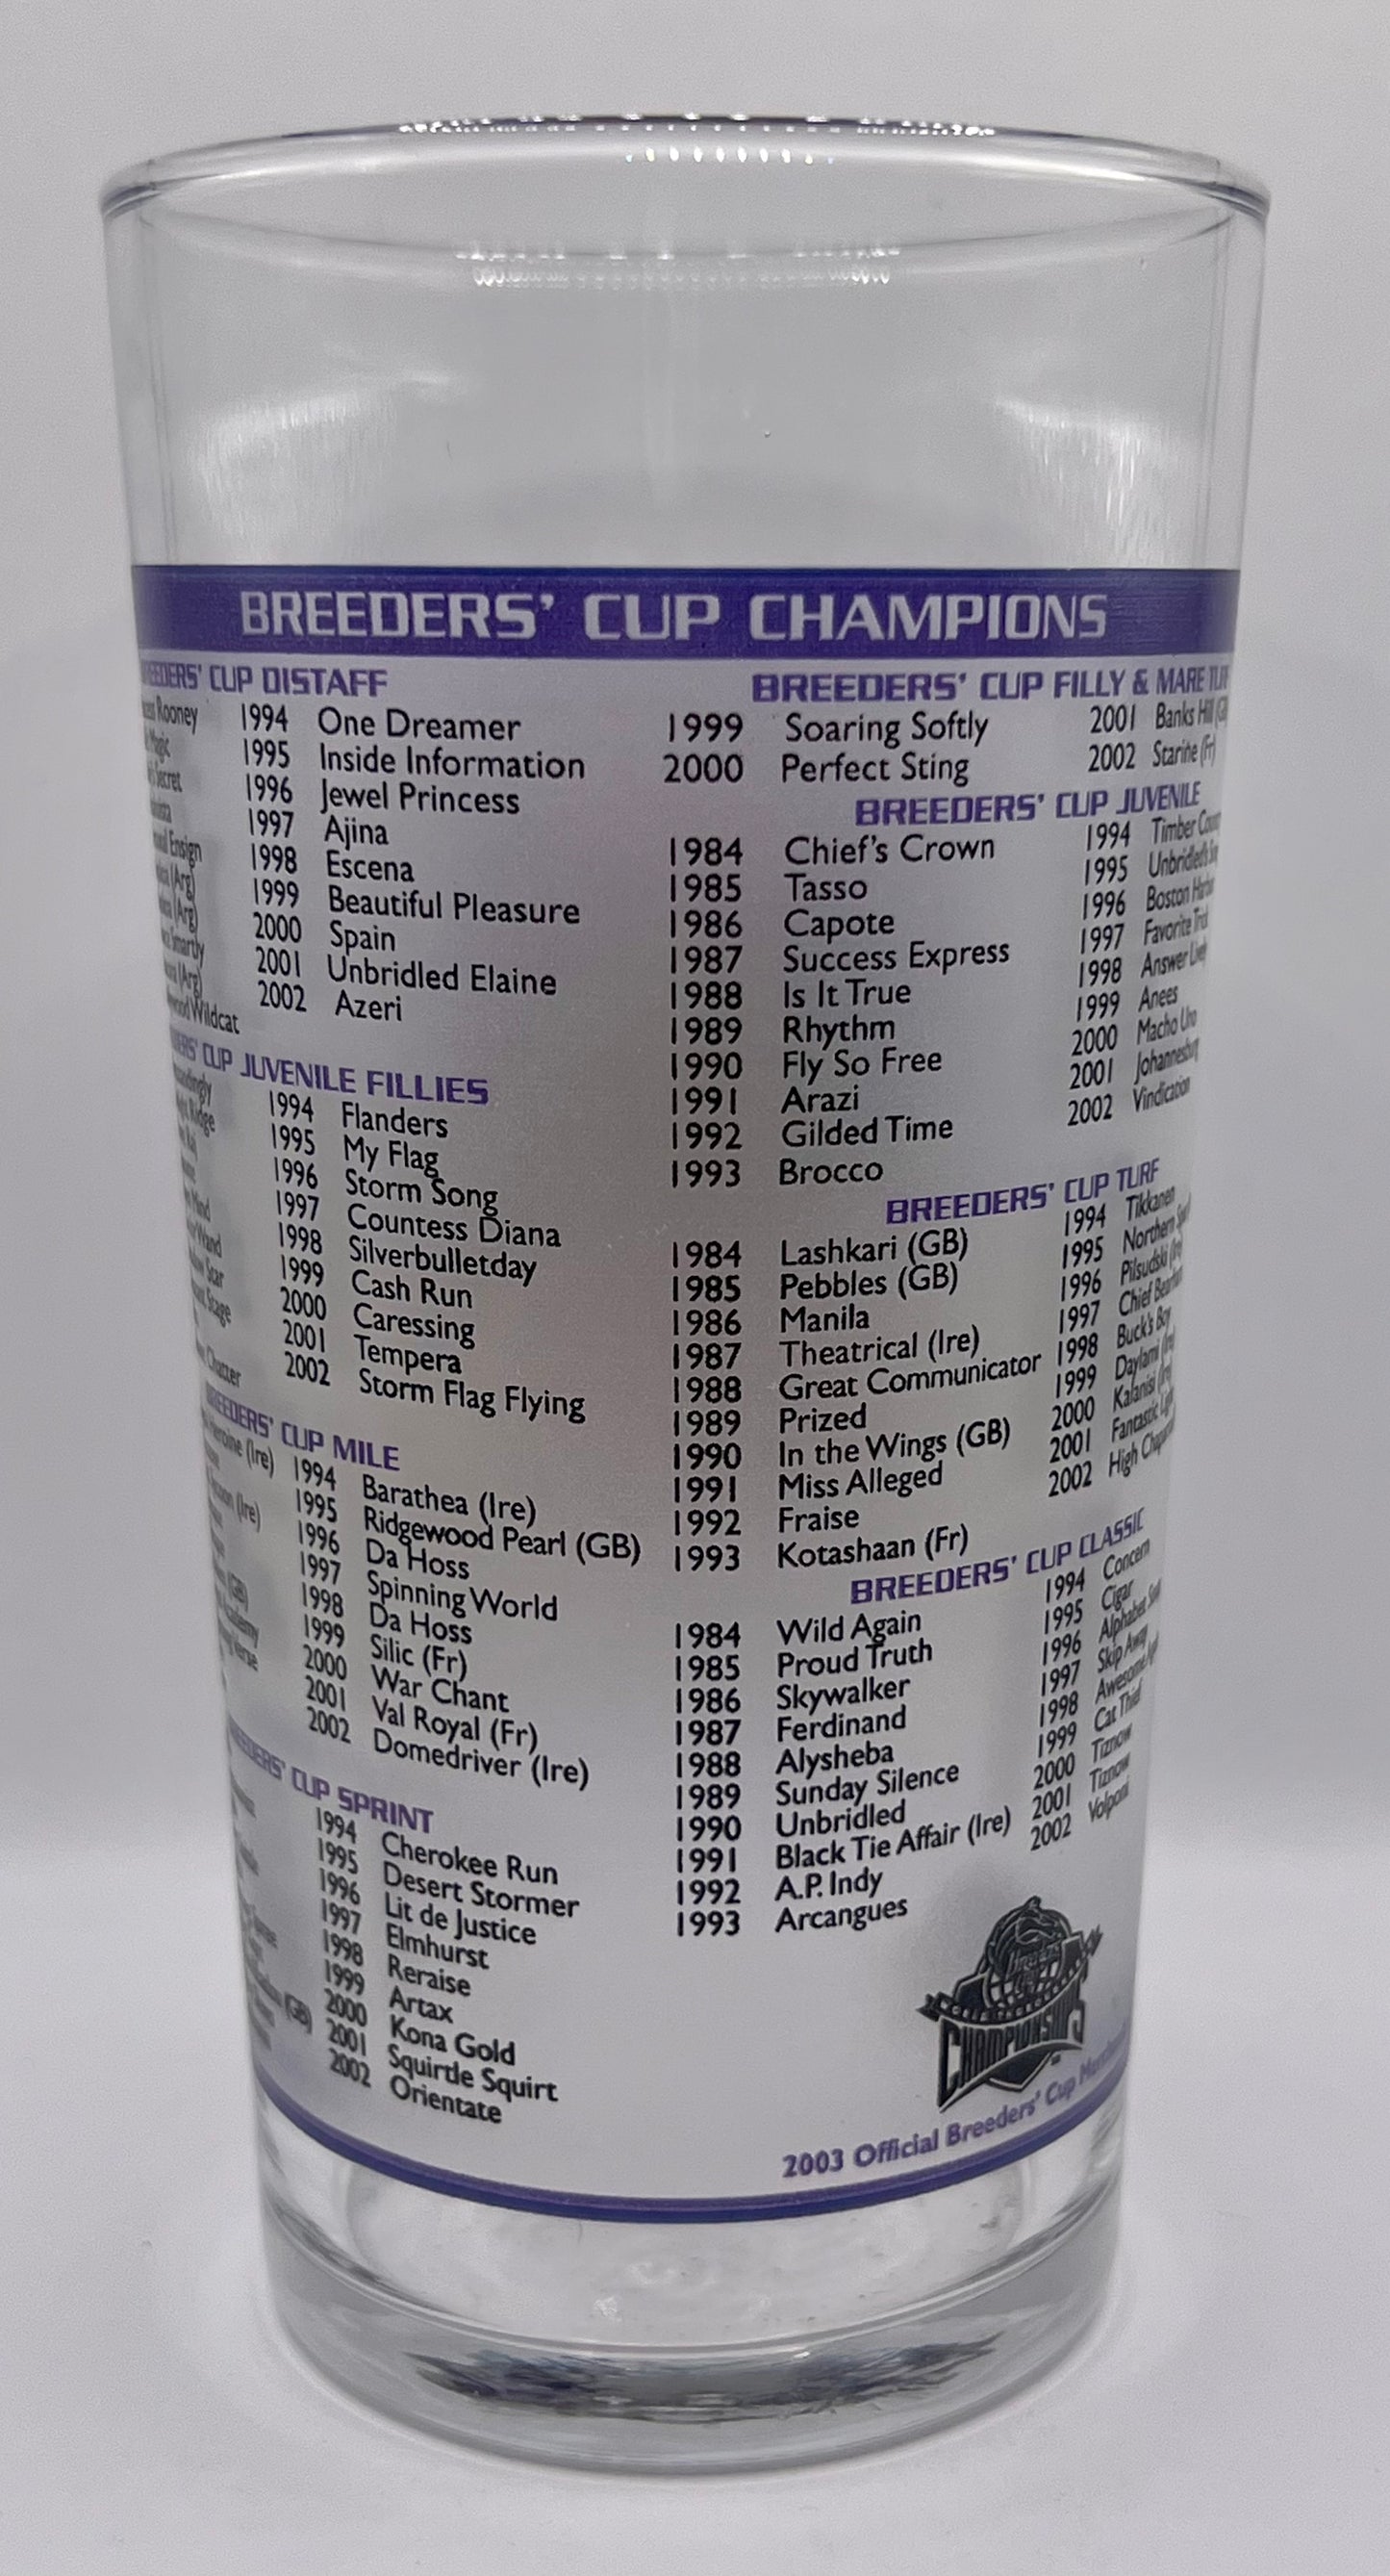 2003 Breeders' Cup Glass